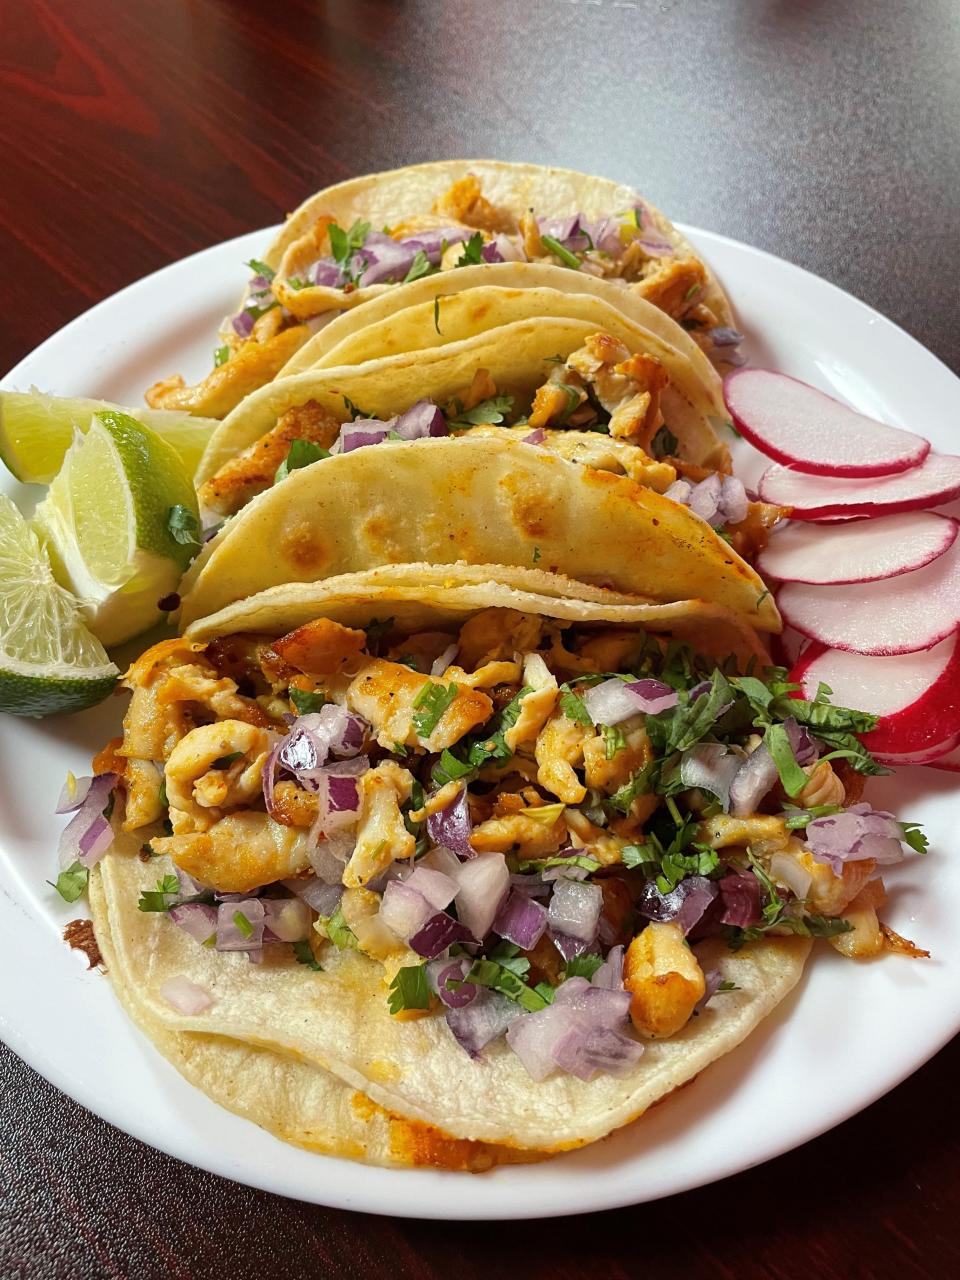 An order of chicken tacos at Mayan Restaurant in Asbury Park.